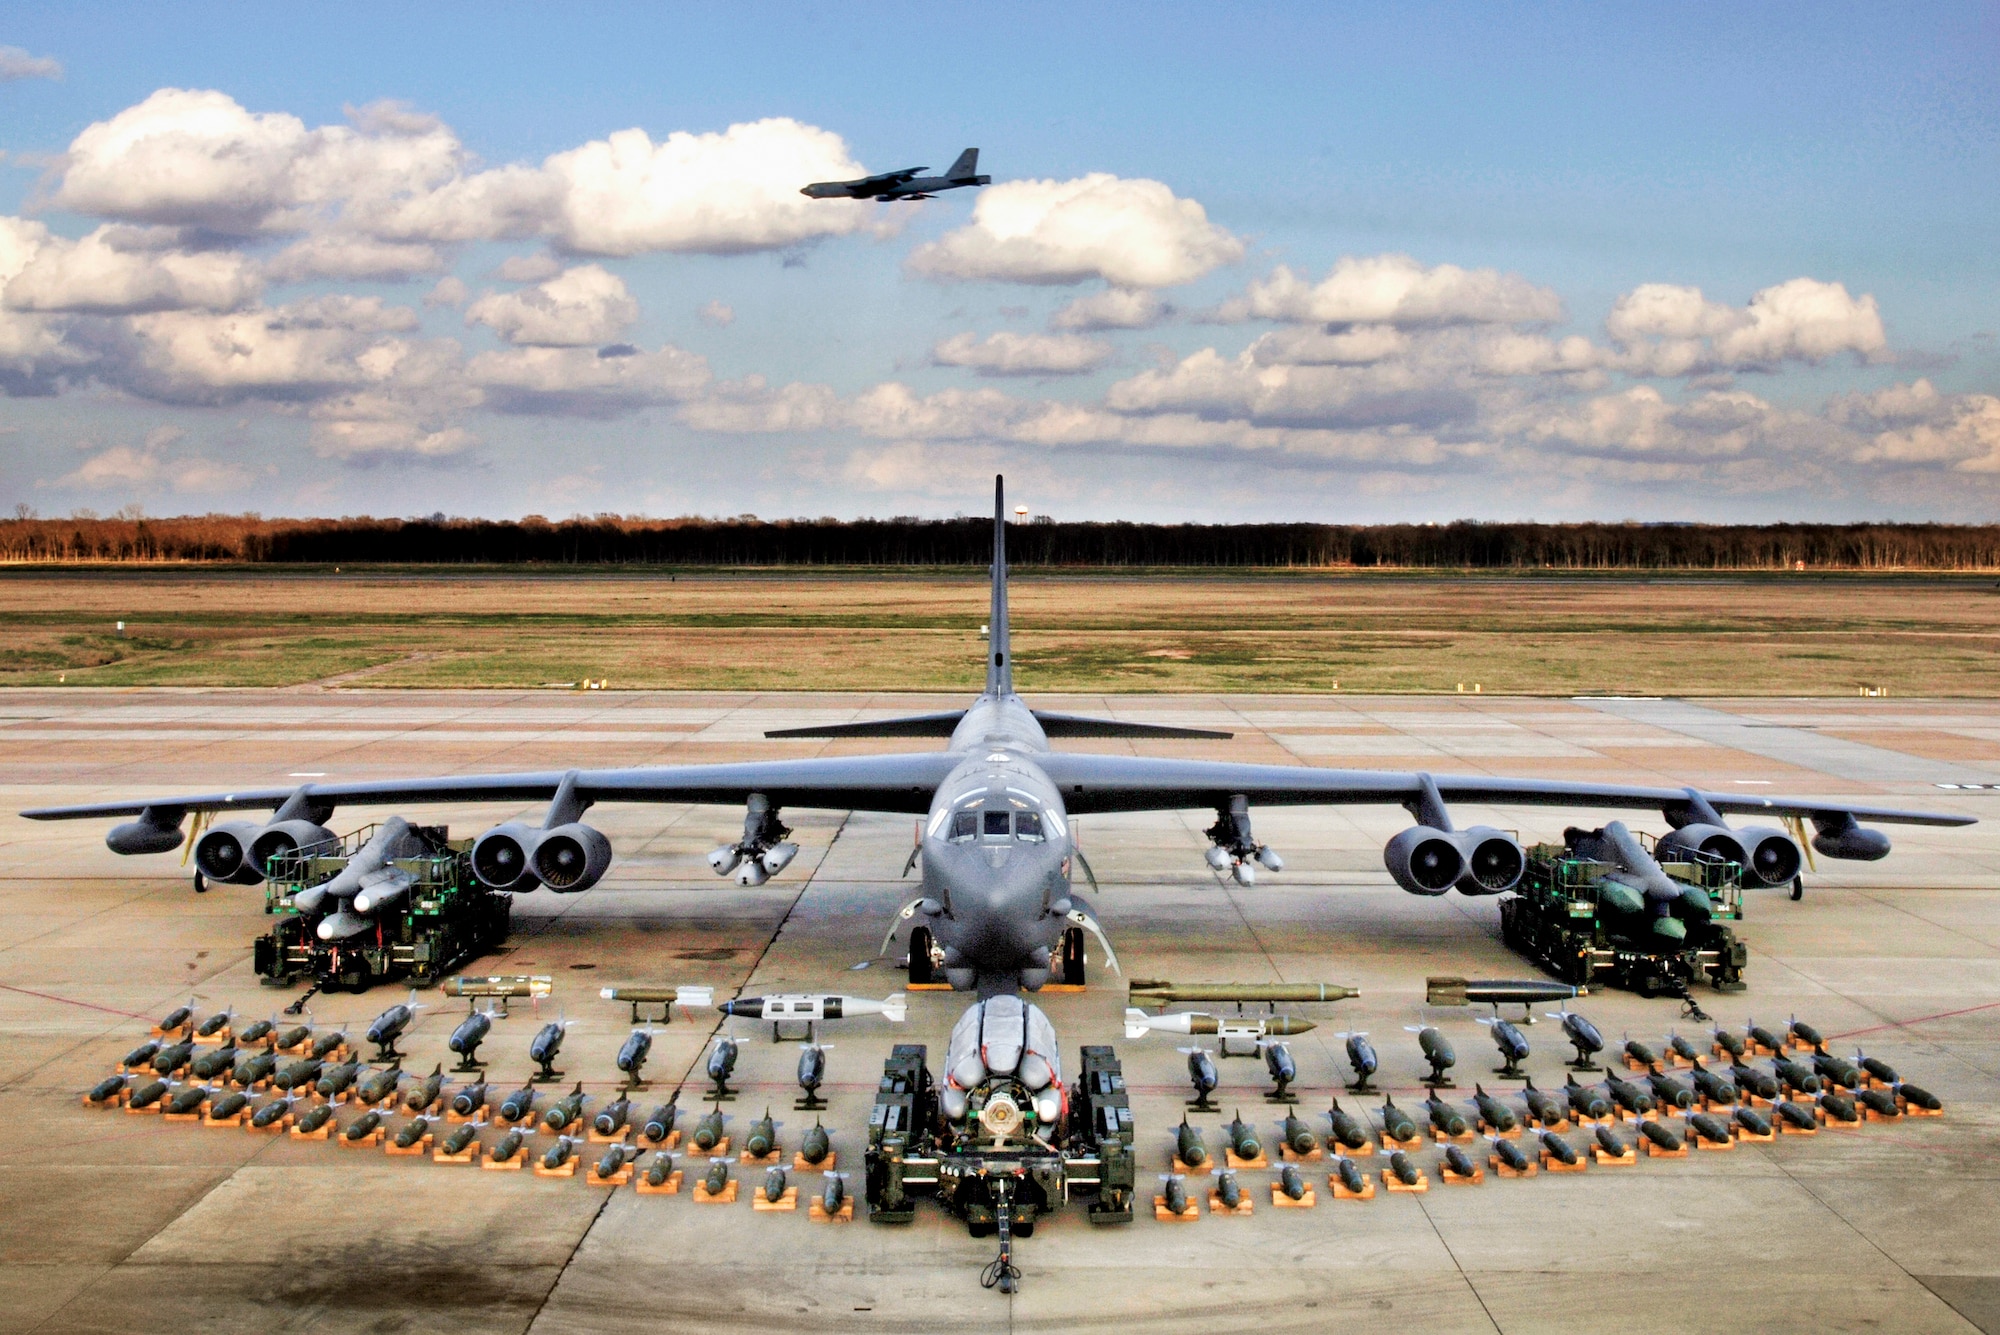 Munitions on display demonstrate the full capabilities of the B-52 Stratofortress, a bomber in the Air Force.  (U.S. Air Force photo/Tech. Sgt. Robert Horstman)